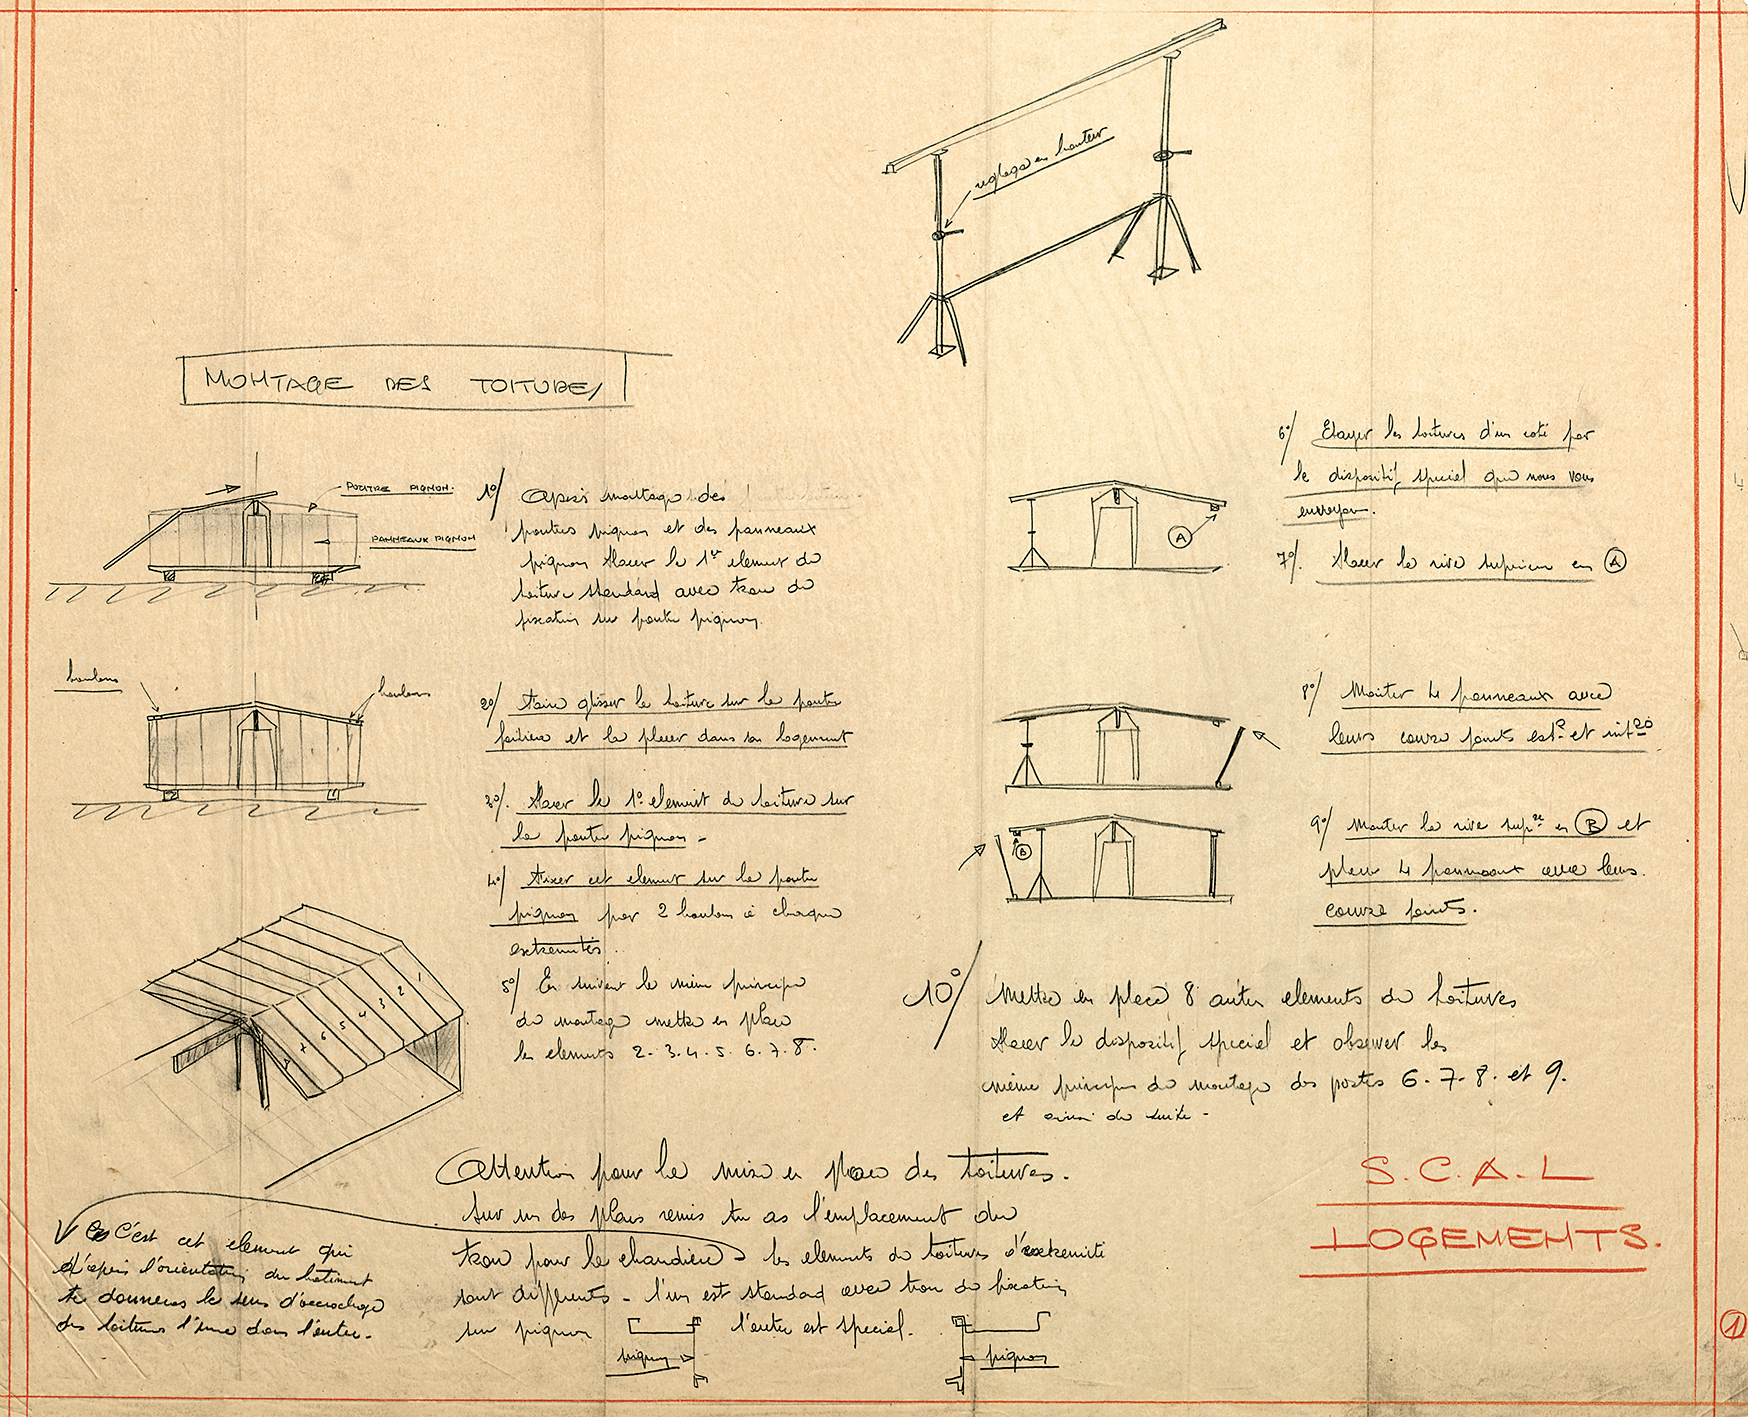 Ateliers Jean Prouvé “SCAL. Accommodation. Assembly of the roofs”. Unnumbered drawing, undated [early 1940].